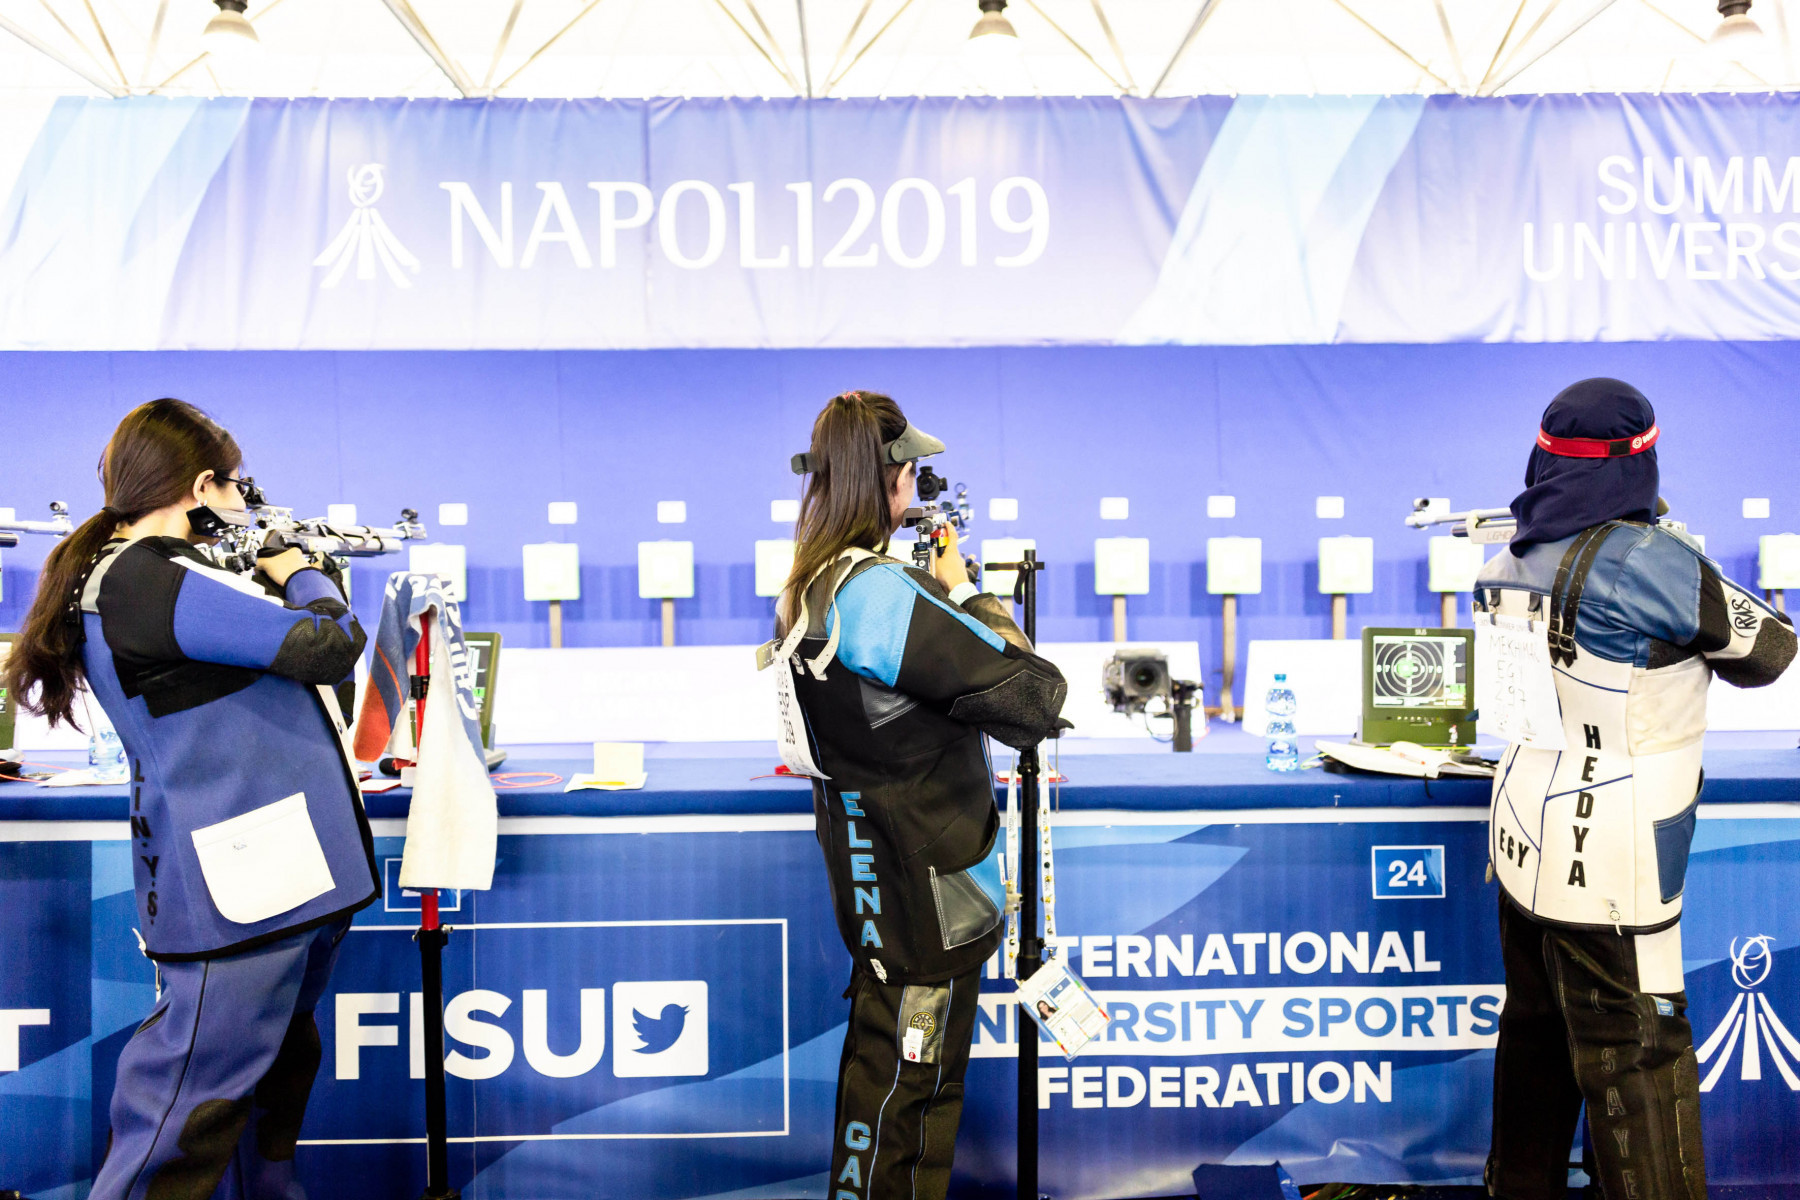 Only one set of medals was awarded in shooting, with the final podium decided in the women's 10m air rifle event ©Naples 2019